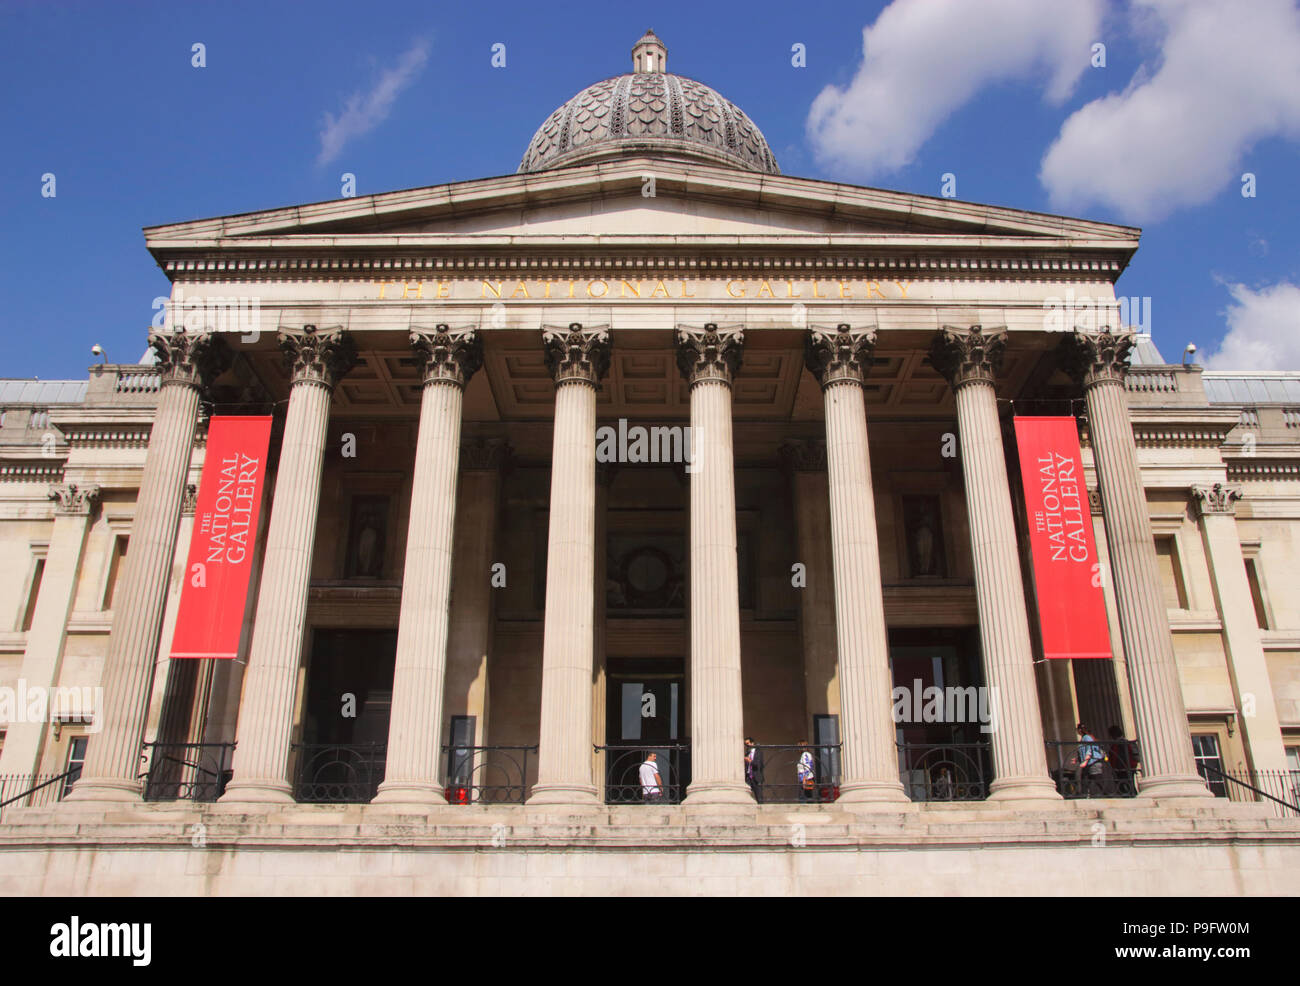 Facade of the National Portrait Gallery London Stock Photo